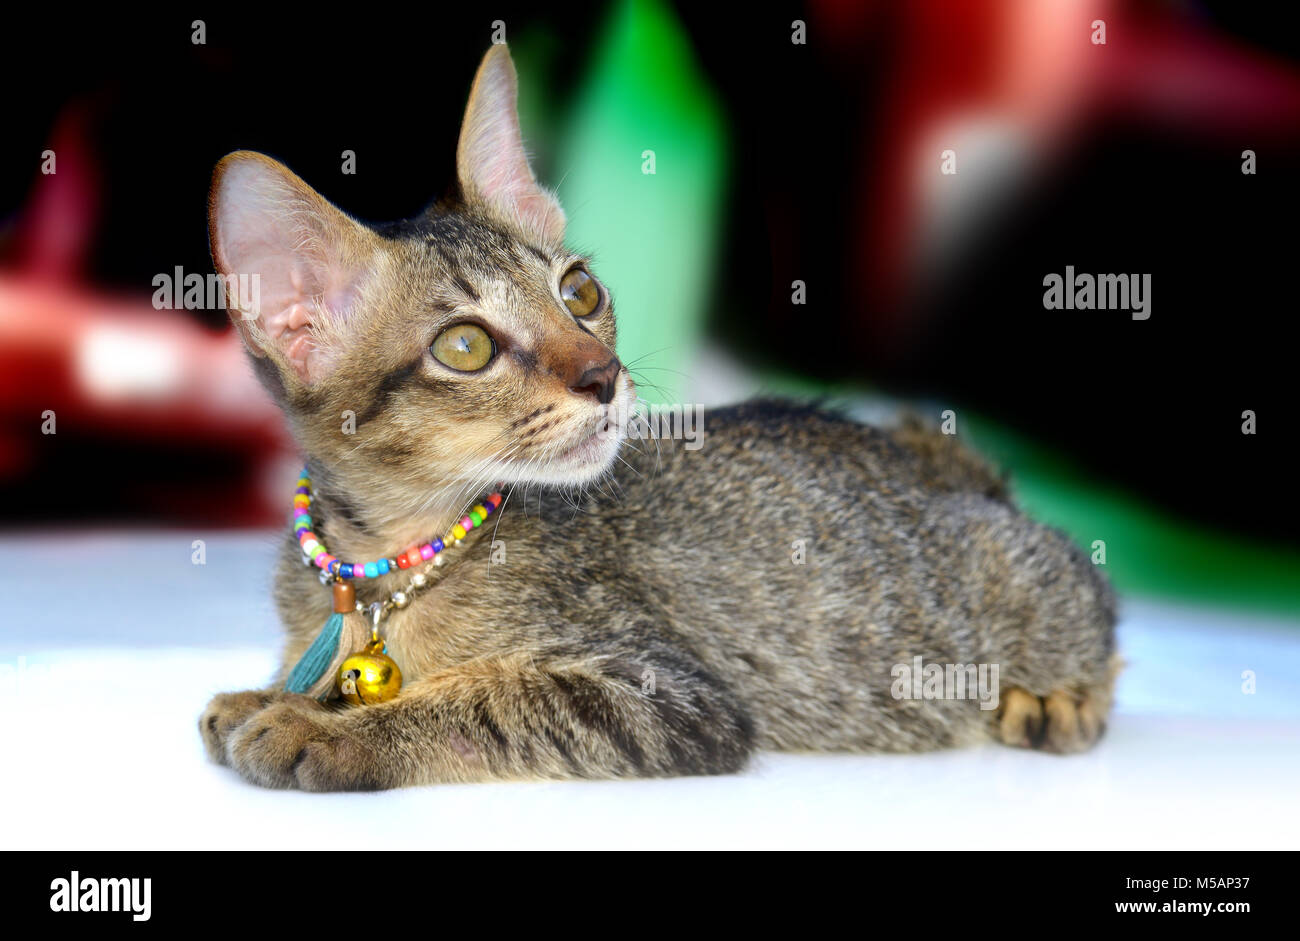 The portrait of Thai kitty cat in relaxing time photo in sunset outdoor lighting. Stock Photo